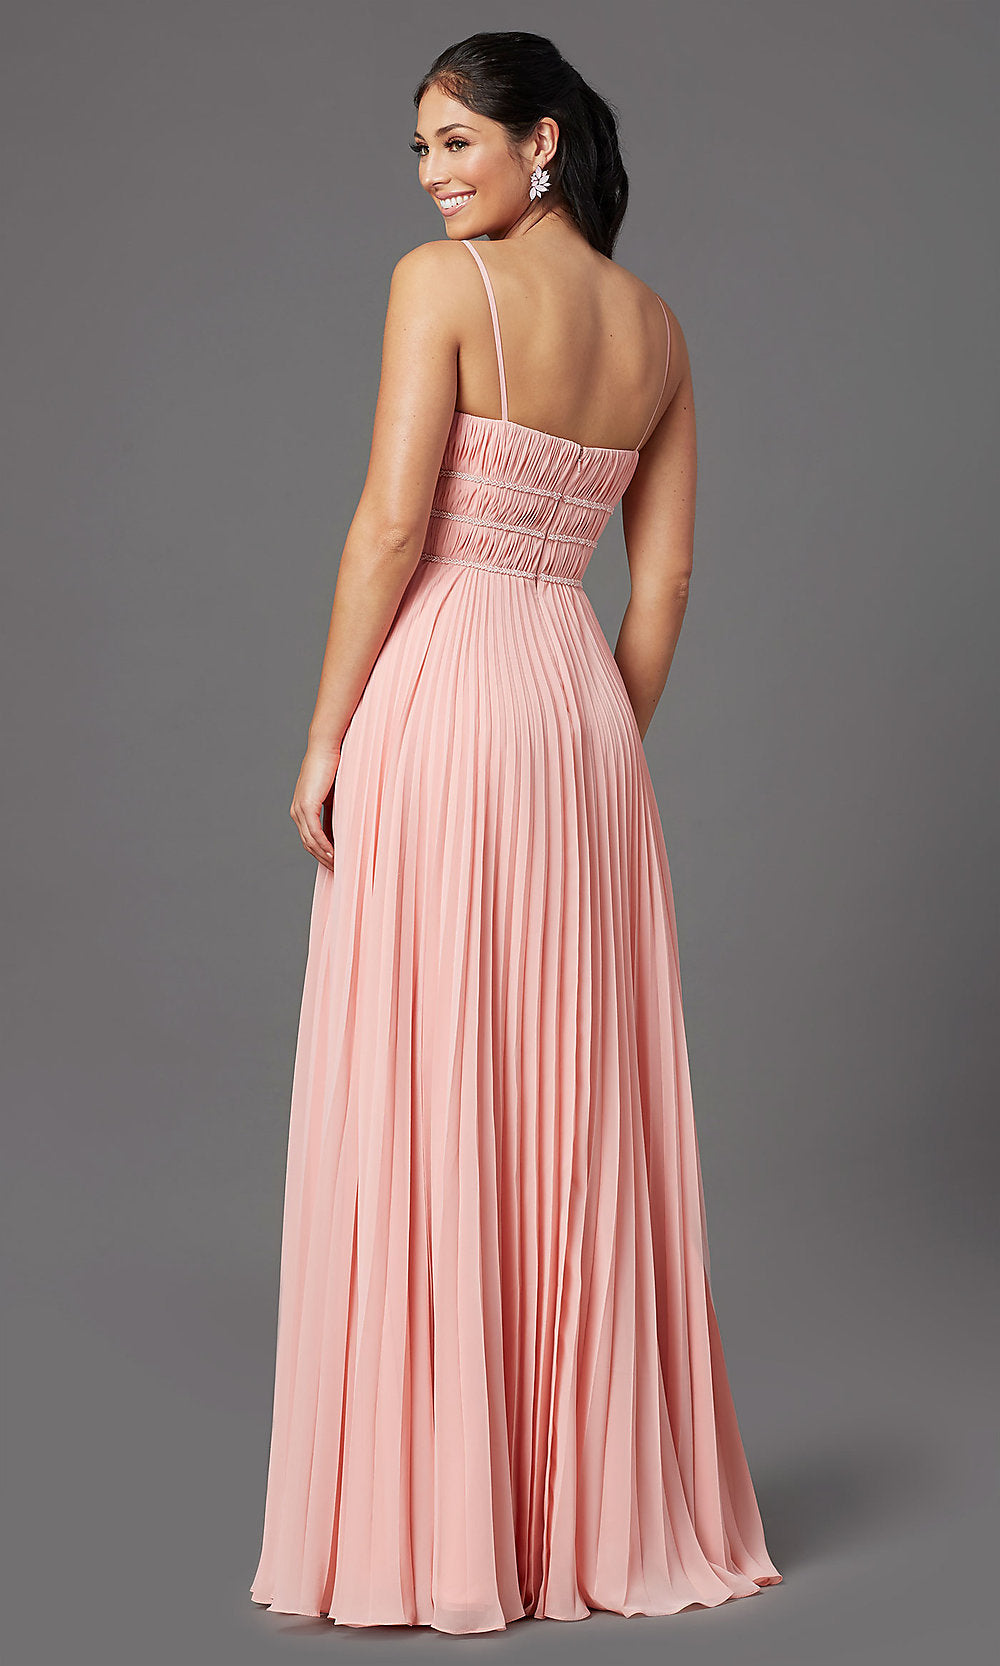  V-Neck Long Pleated Formal Prom Dress by PromGirl